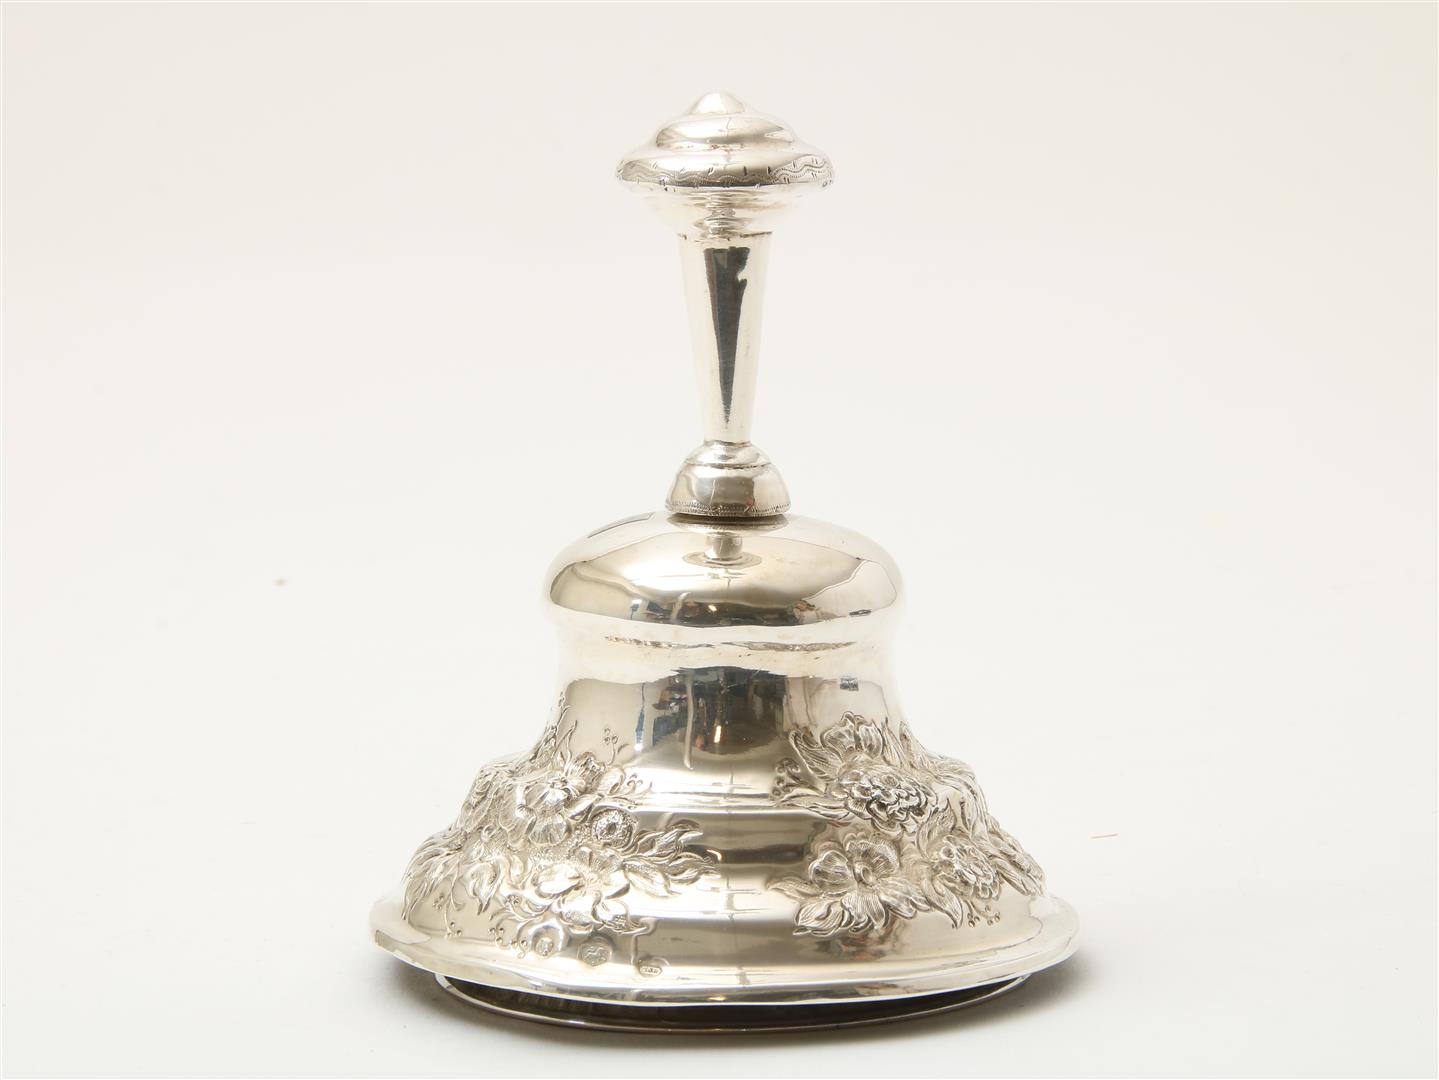 Partly silver table bell decorated with rosettes, grade 835/000, maker's mark: "2SH": Gerbinus